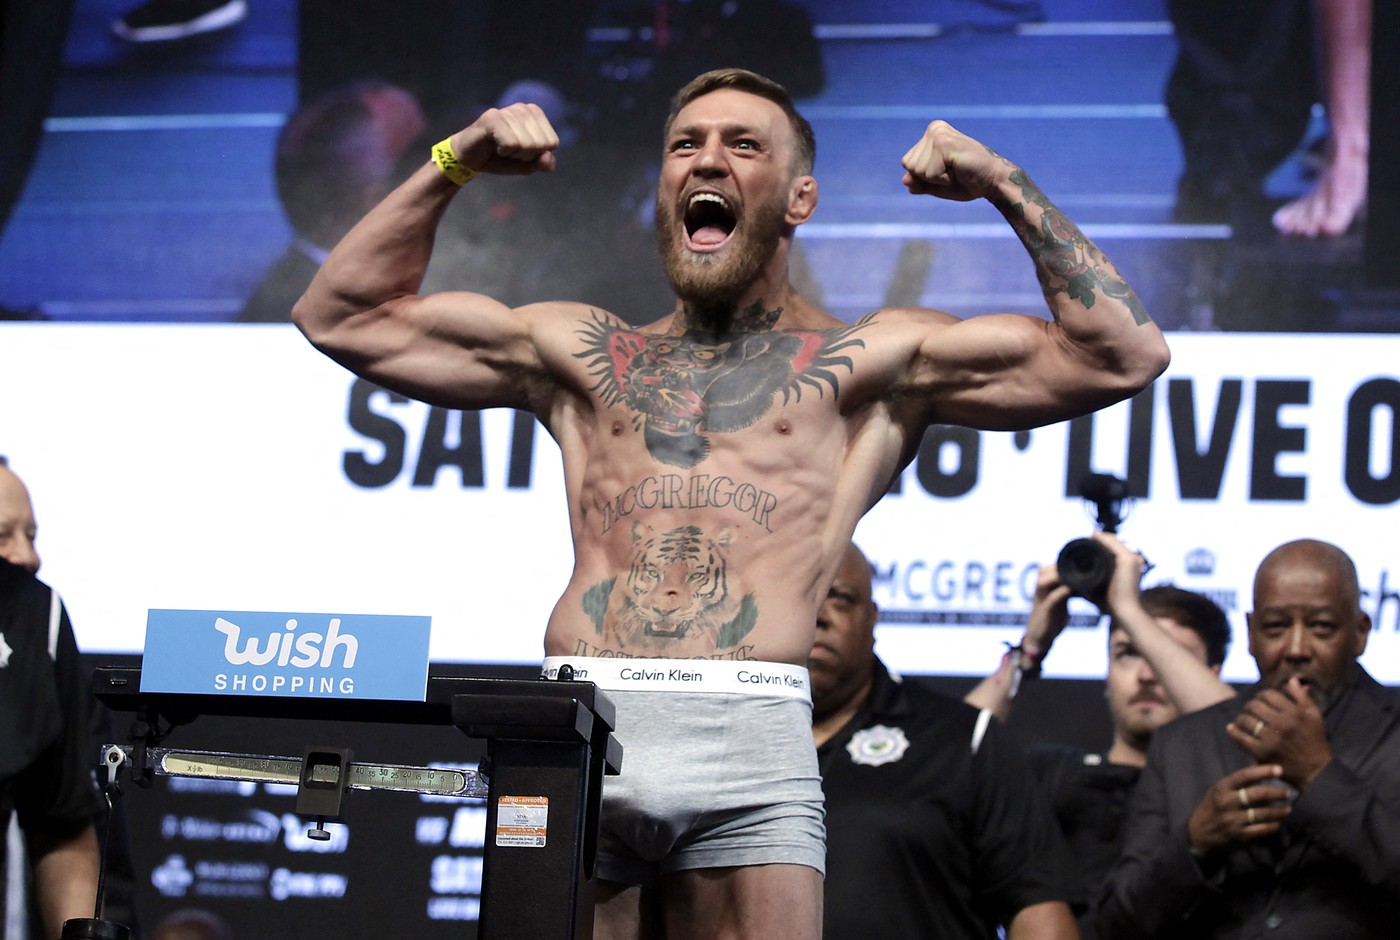 MMA figher Connor Mcgregor poses during a weigh- in on August 25, 2017, in Las Vegas, Nevada.  Boxer Floyd Mayweather Jr., the 40-year-old undefeated former welterweight boxing champion, will face McGregor, a star of mixed martial arts' Ultimate Fighting Championship, in a 12-round contest under boxing rules on August 26.,Image: 346711262, License: Rights-managed, Restrictions: , Model Release: no, Credit line: John GURZINSKI / AFP / Profimedia